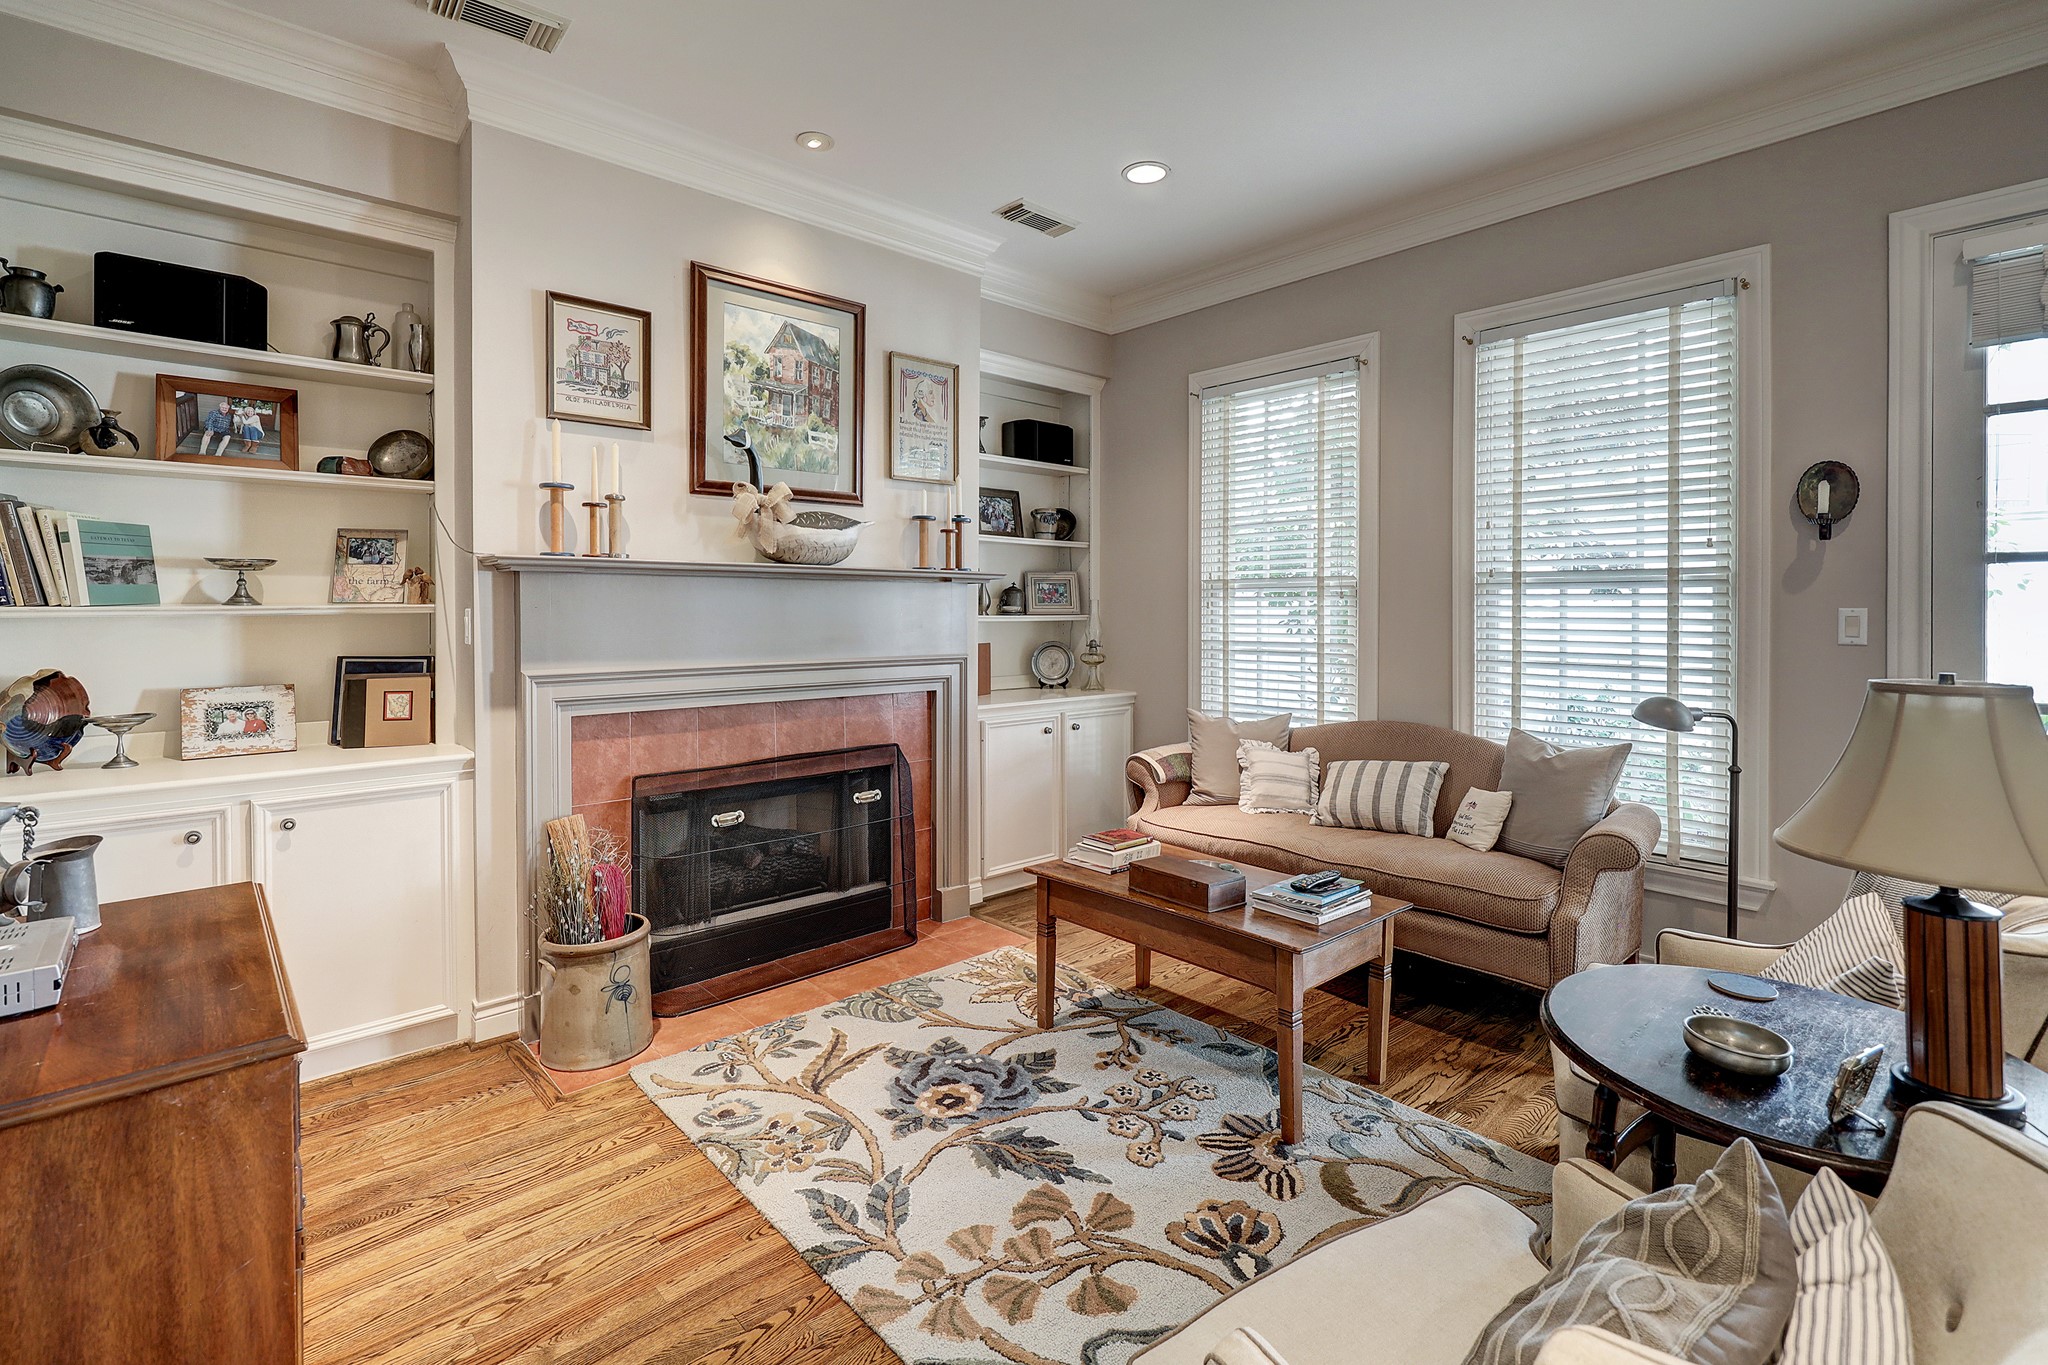 This cozy family room has a gas log fireplace with a beautiful mantel and is completely connected to the kitchen.